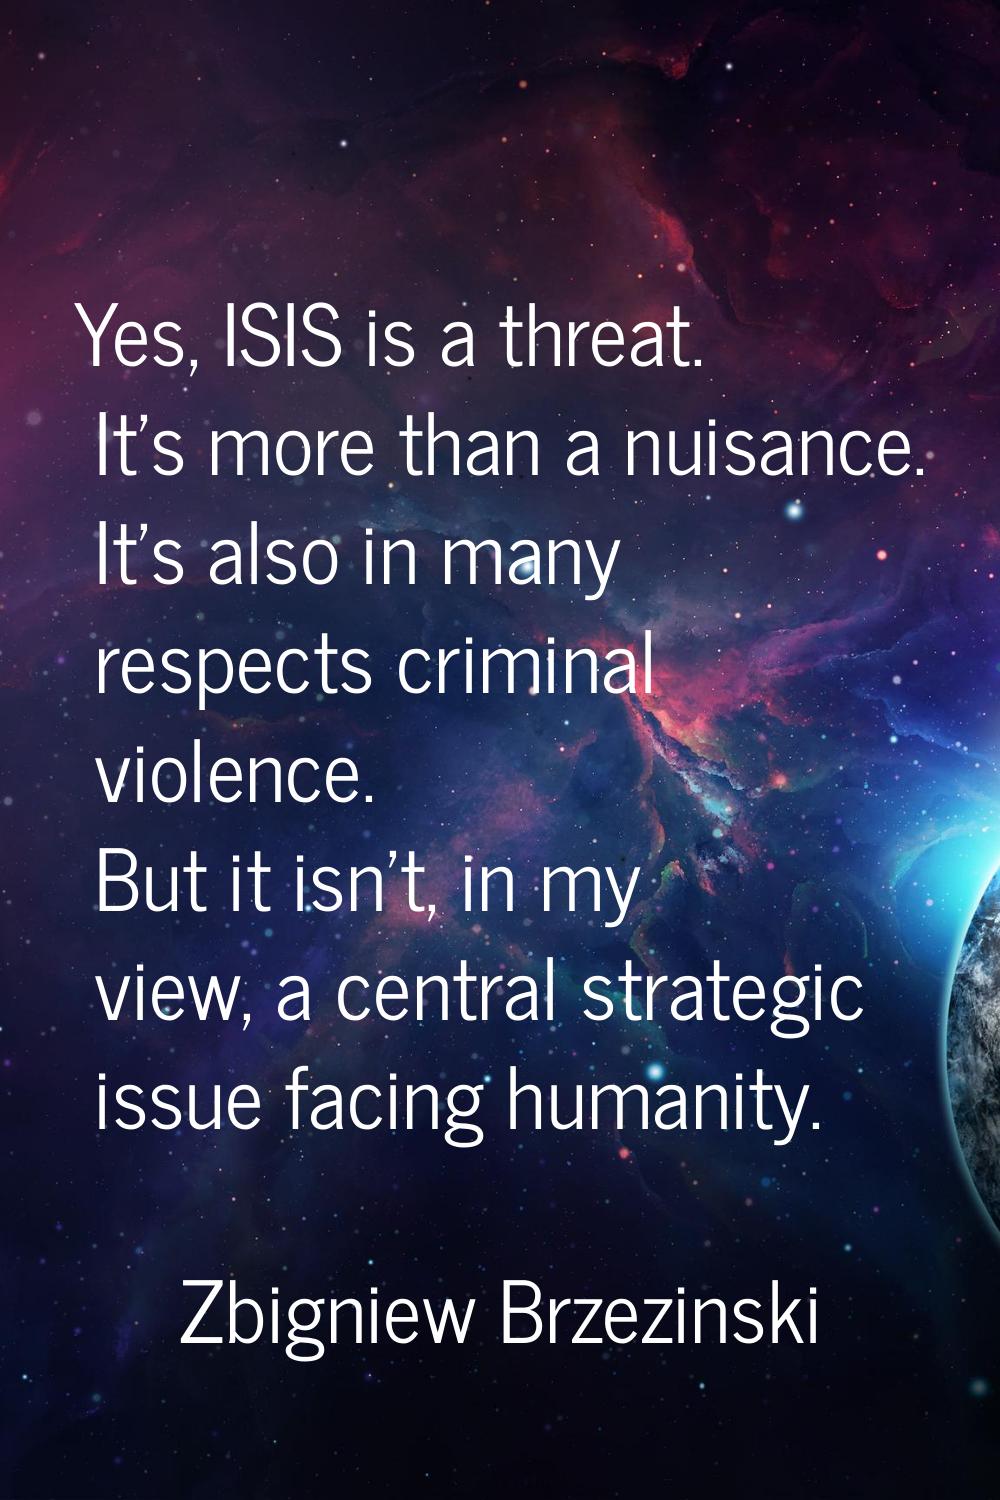 Yes, ISIS is a threat. It's more than a nuisance. It's also in many respects criminal violence. But